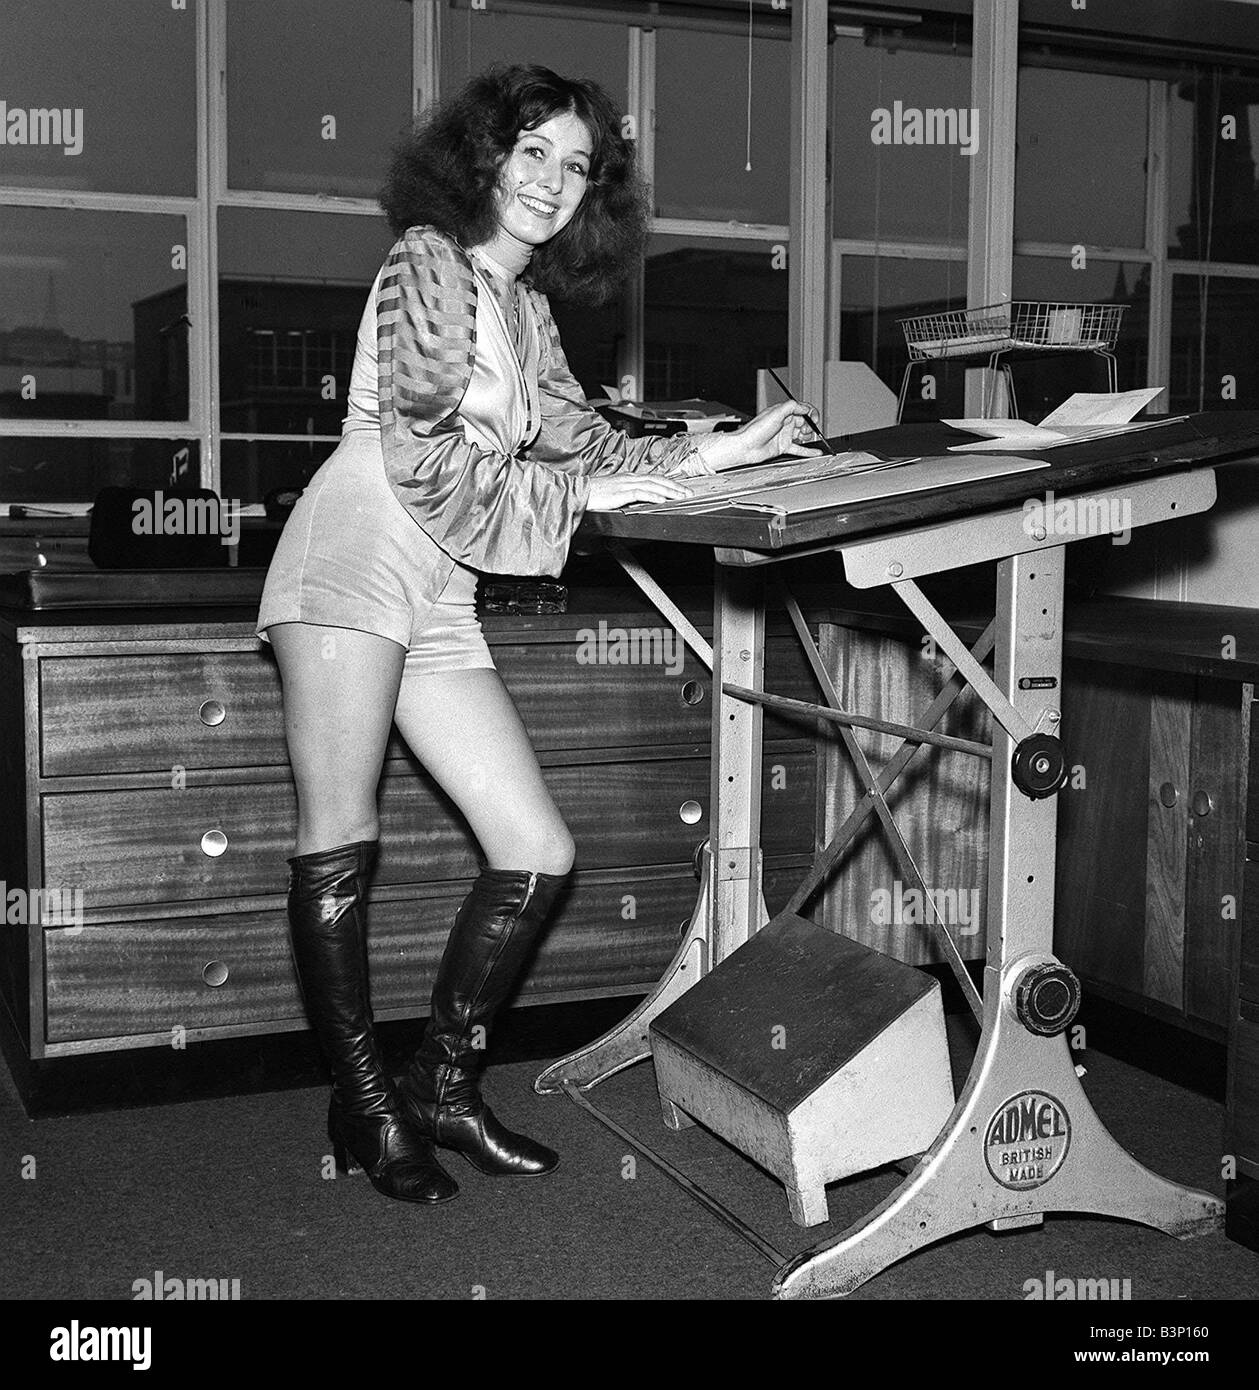 Fashion Shorts Seventies 1970 s Designer and artist working at station wearing hotpants and knee high boots Stock Photo